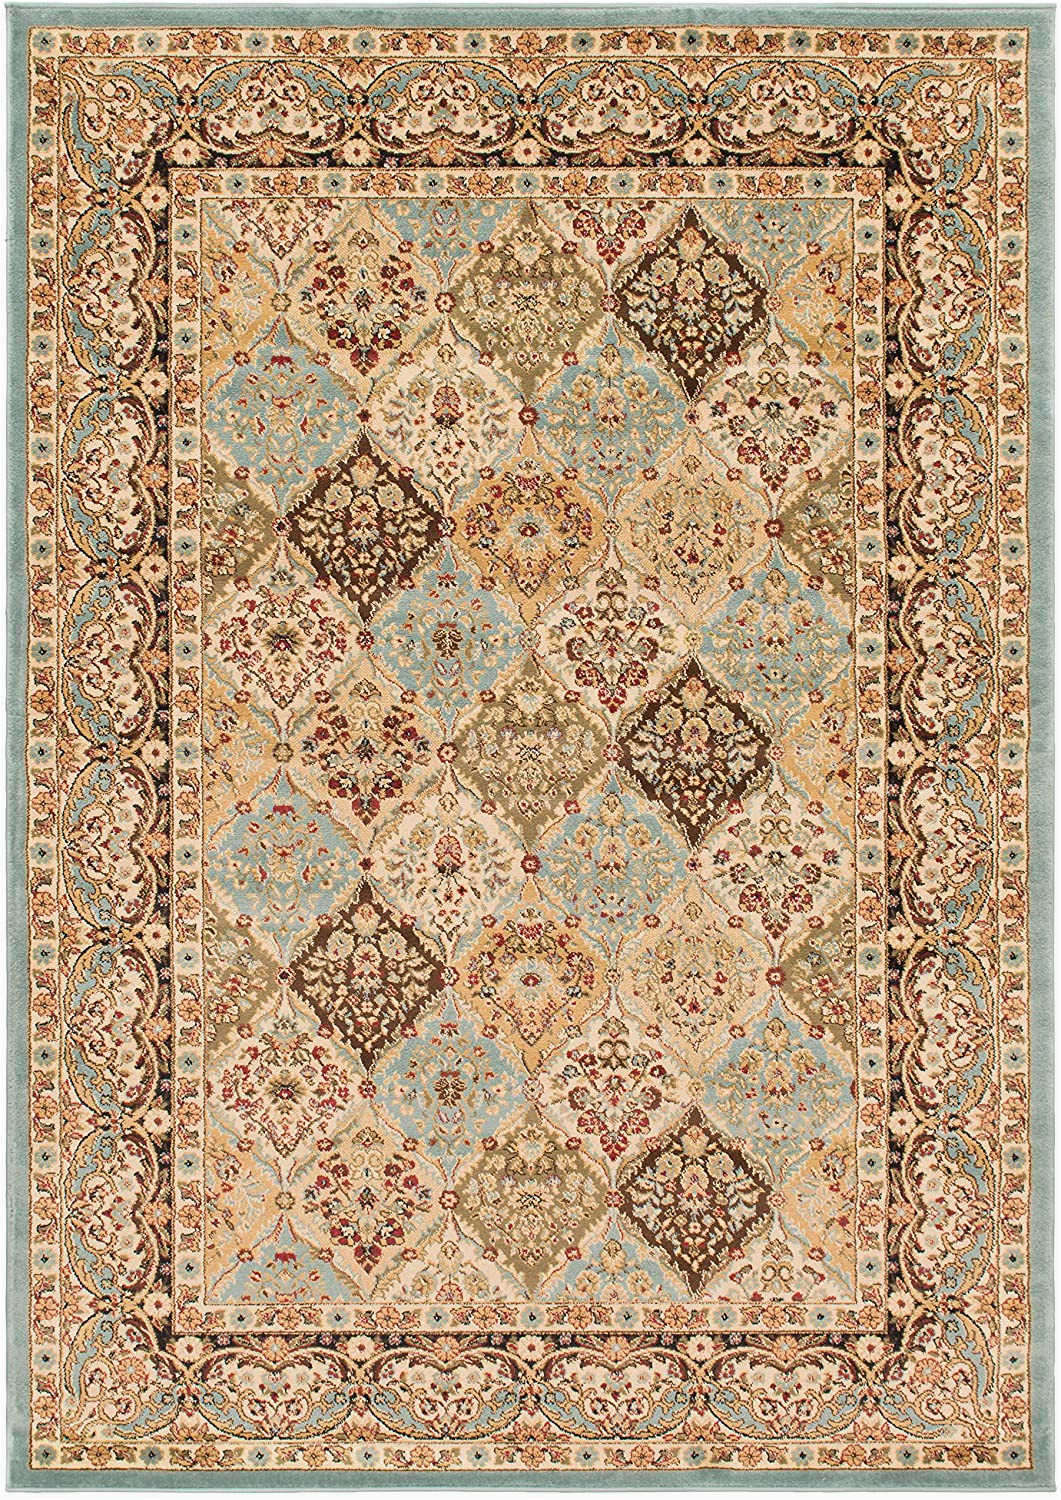 At Home area Rugs 8×10 Amazon Mayberry Rugs Home town Panel Kerman area Rug 8